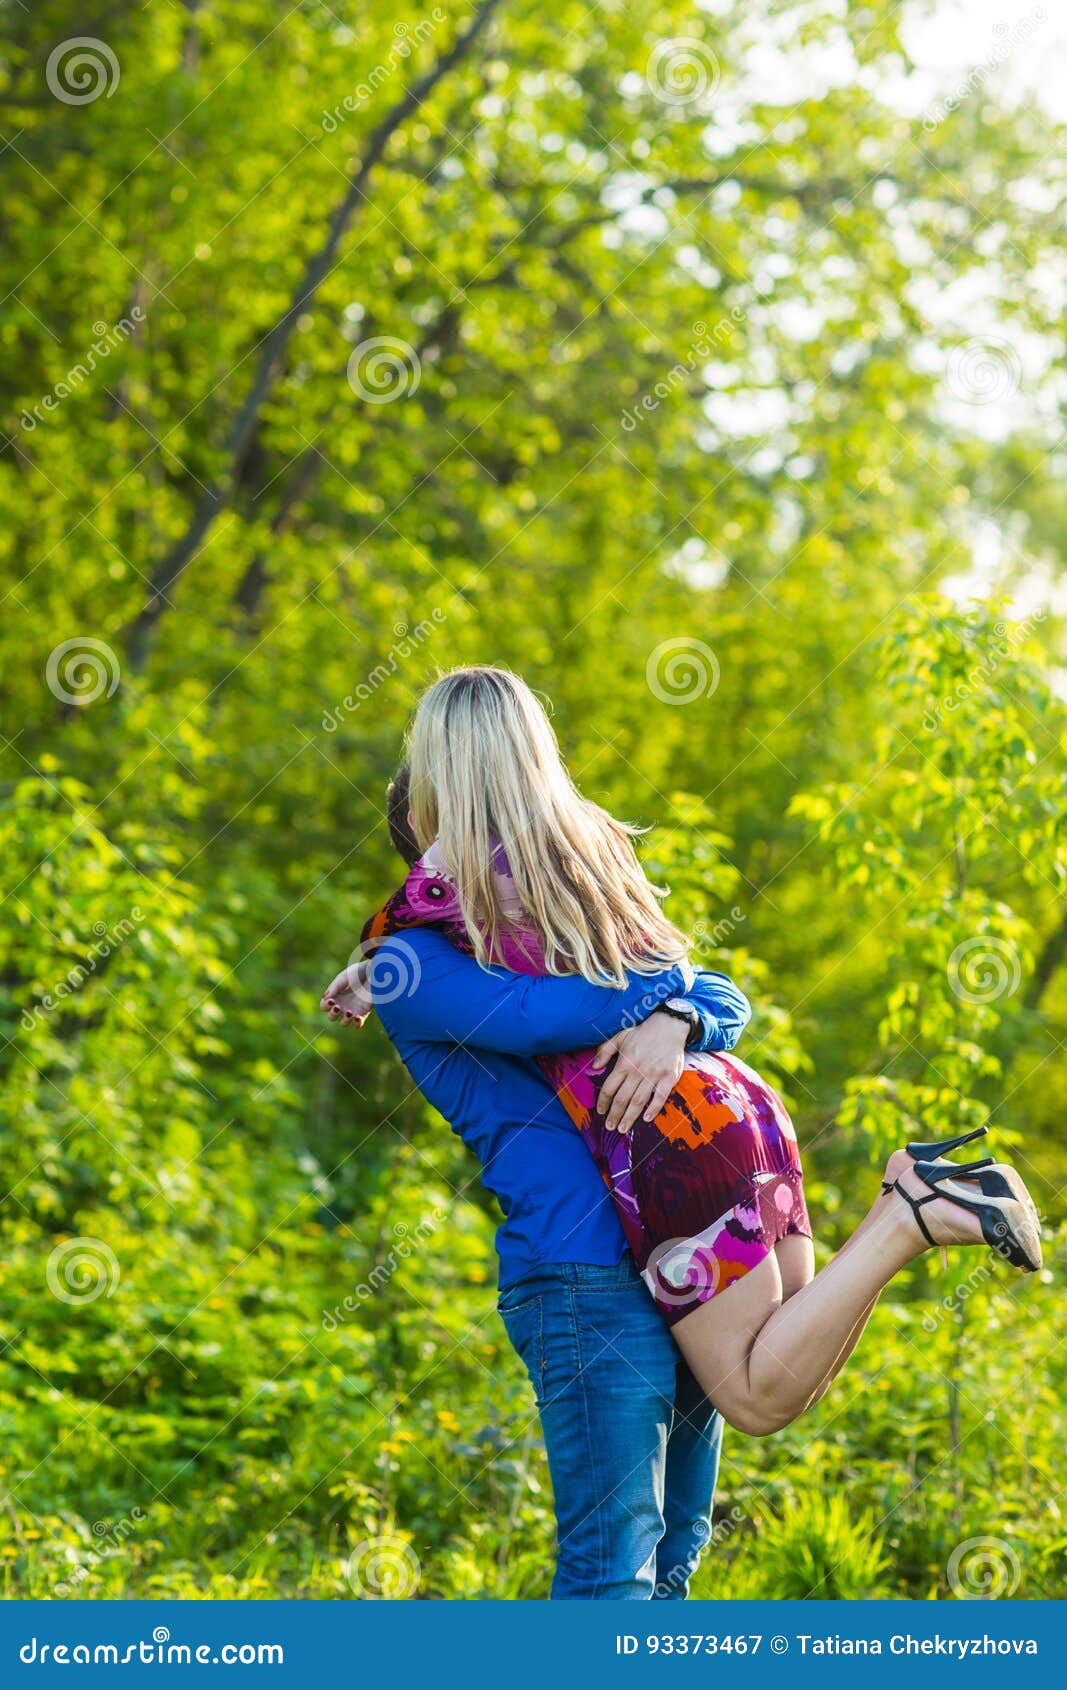 Romantic Happy Couple in on Nature. Man Woman Kissing and Hugging in Summer Park. Stock Image - Image of relaxing, love: 93373467